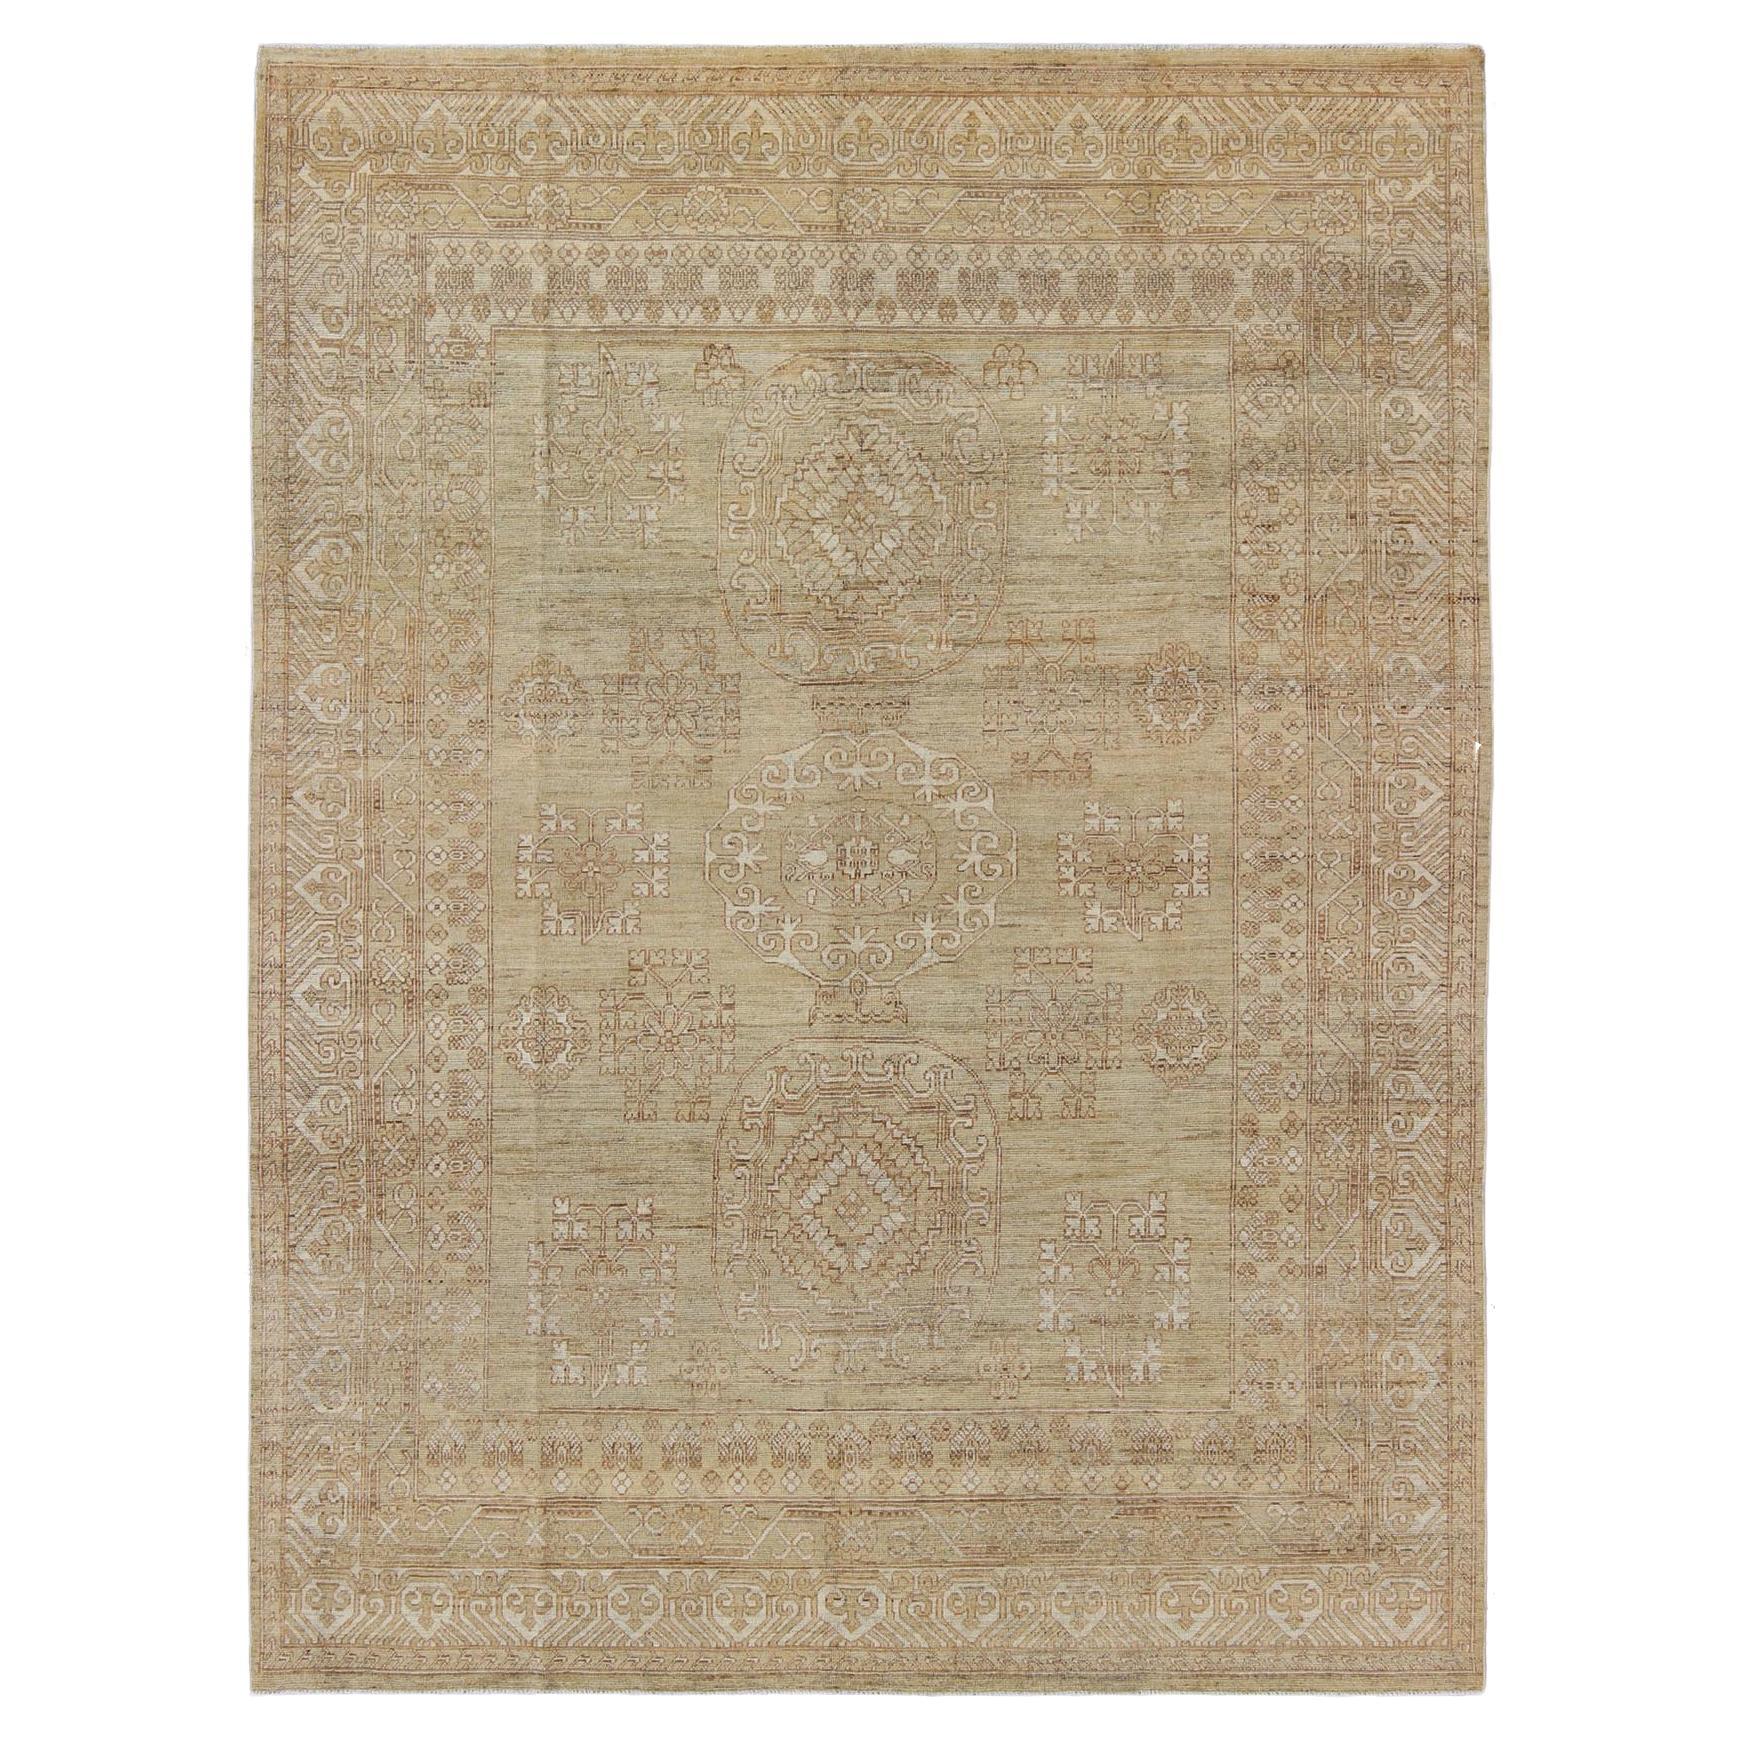 Khotan Design Rug with All-Over Geometric Pattern in Light Brown and Green's